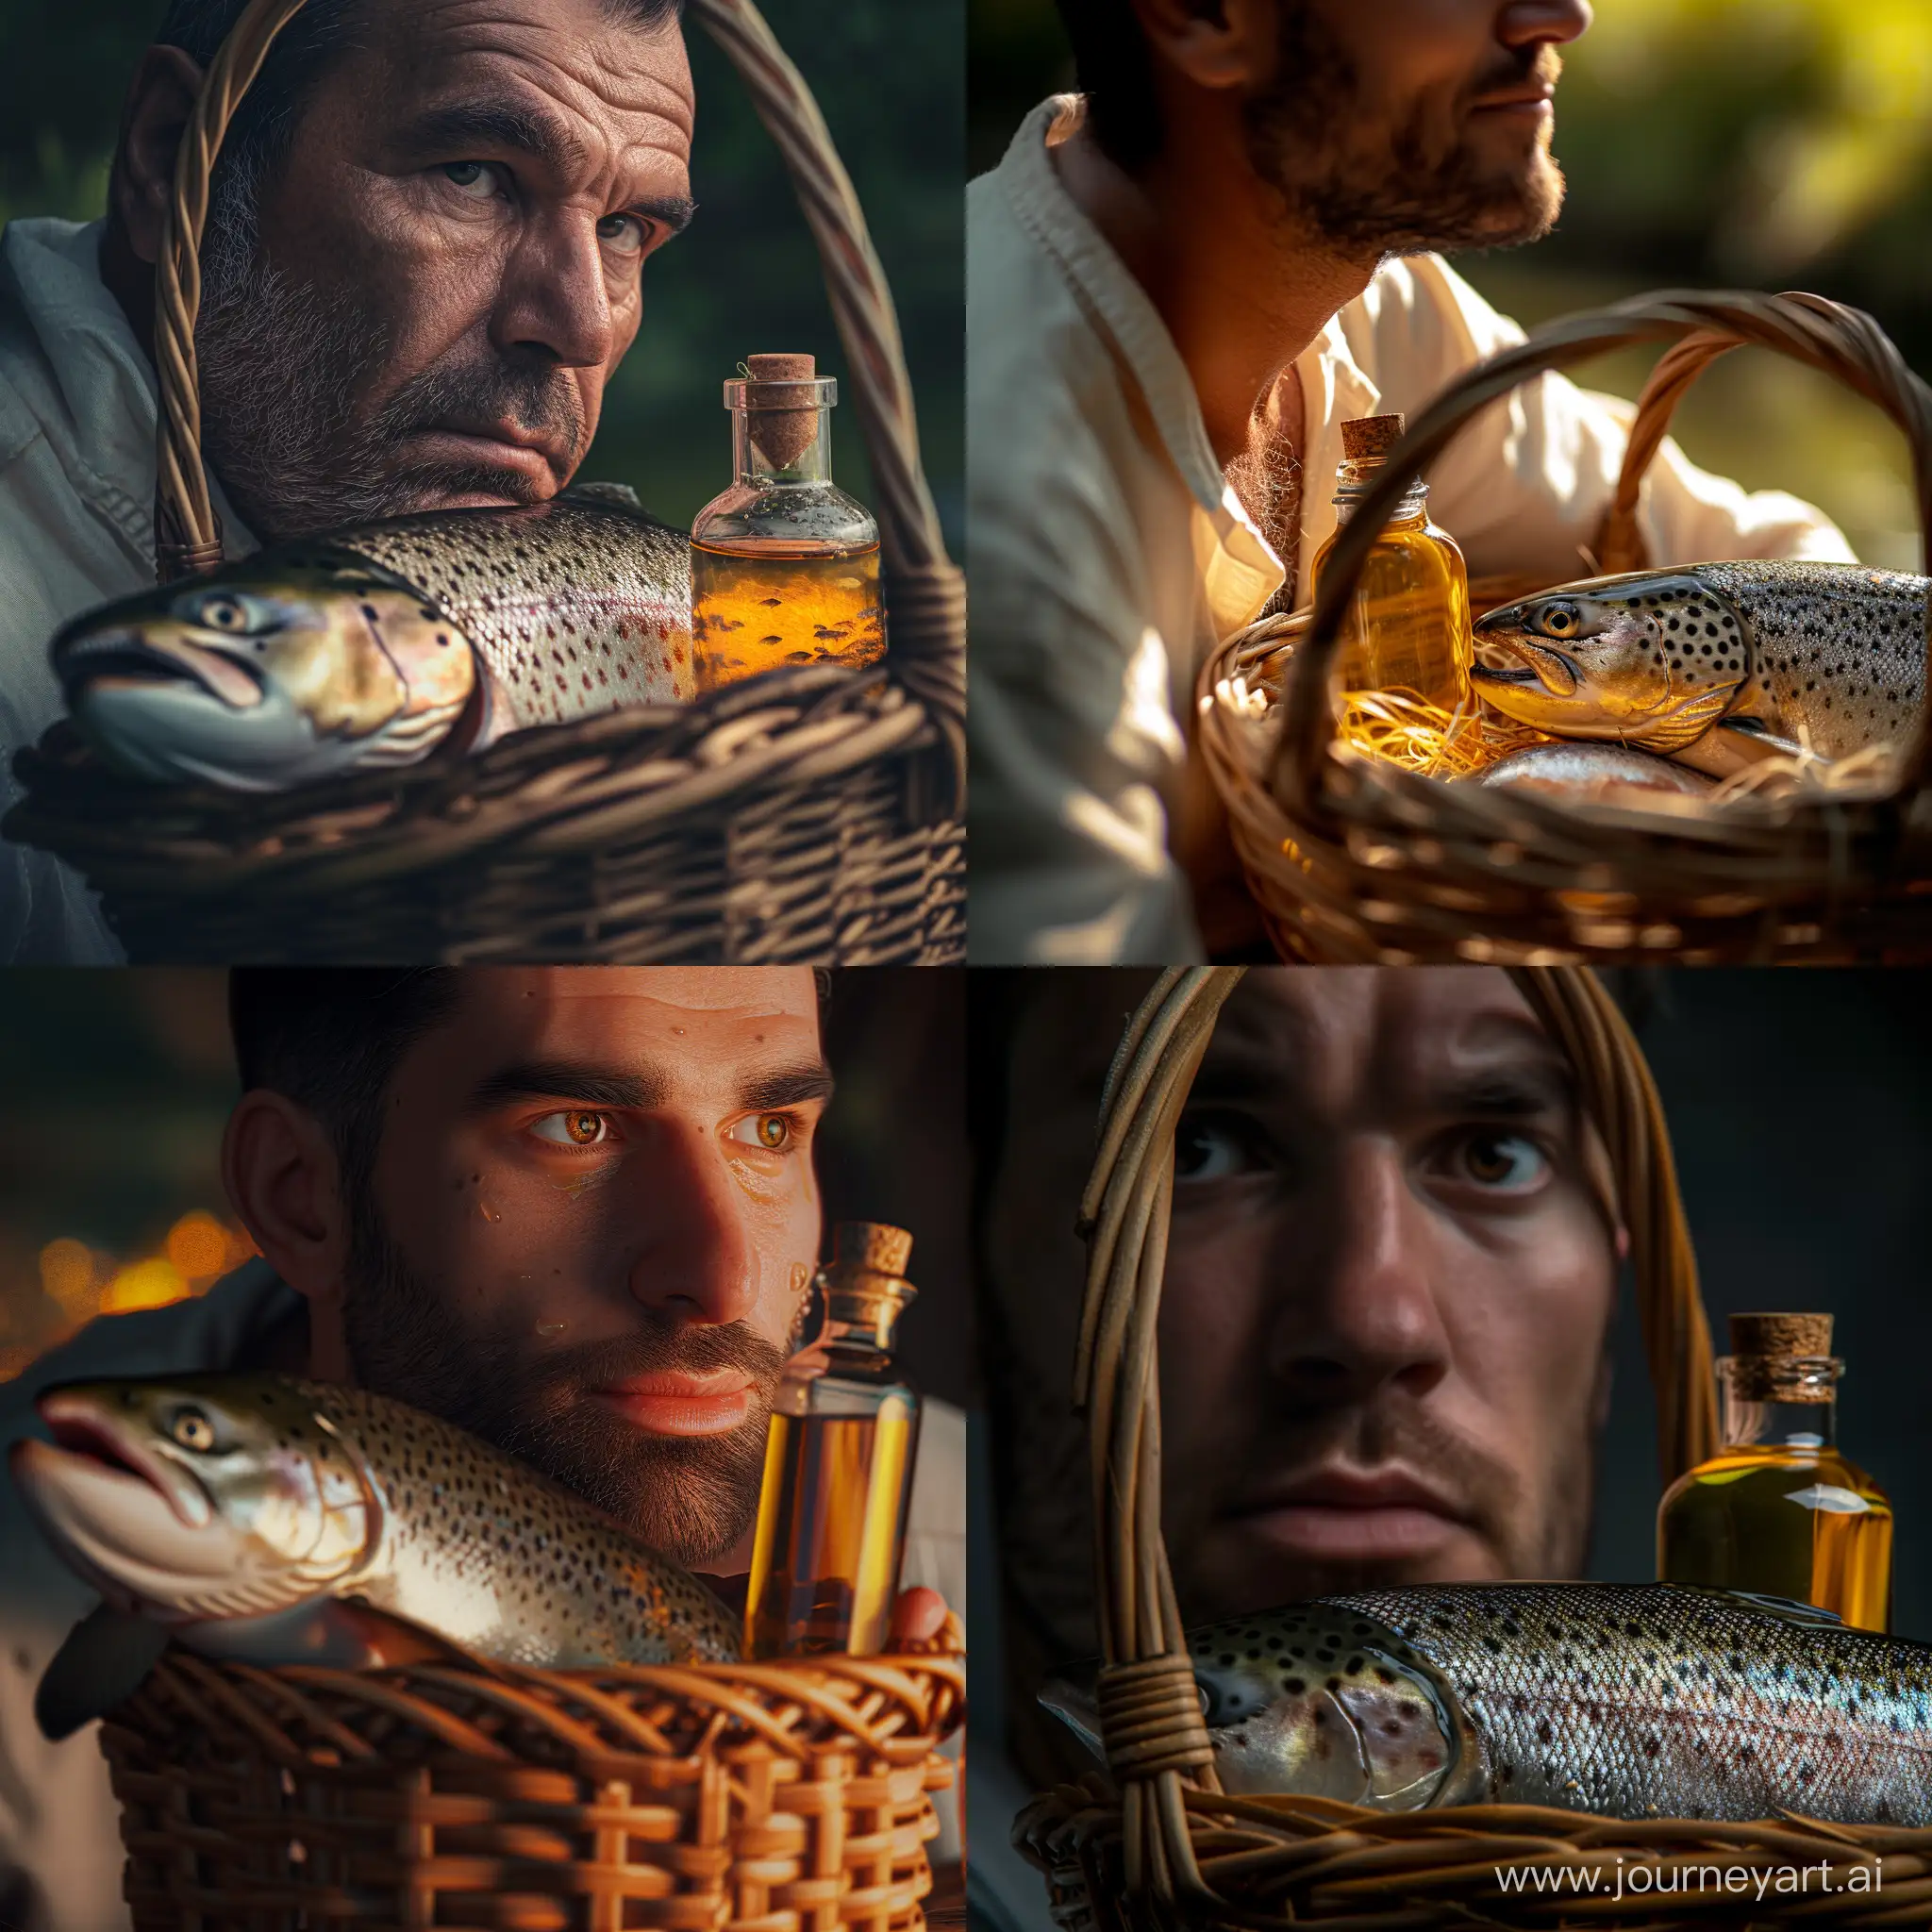 Hyperrealistic-Portrait-of-a-Man-with-Basket-of-Fish-Oil-and-Salmon